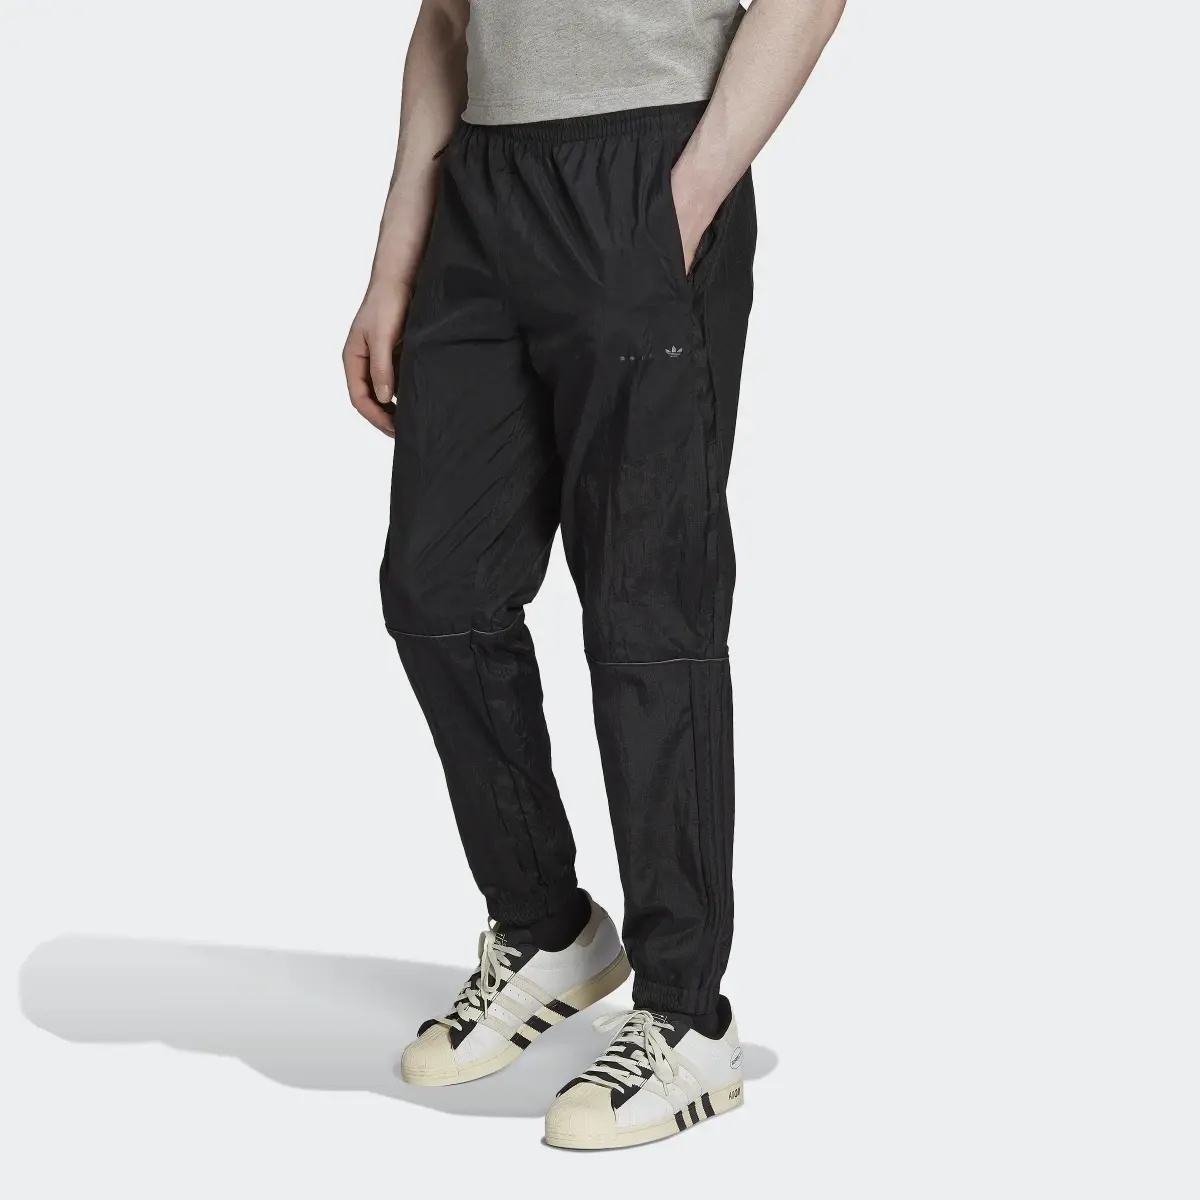 Adidas Reveal Material Mix Track Pants. 1